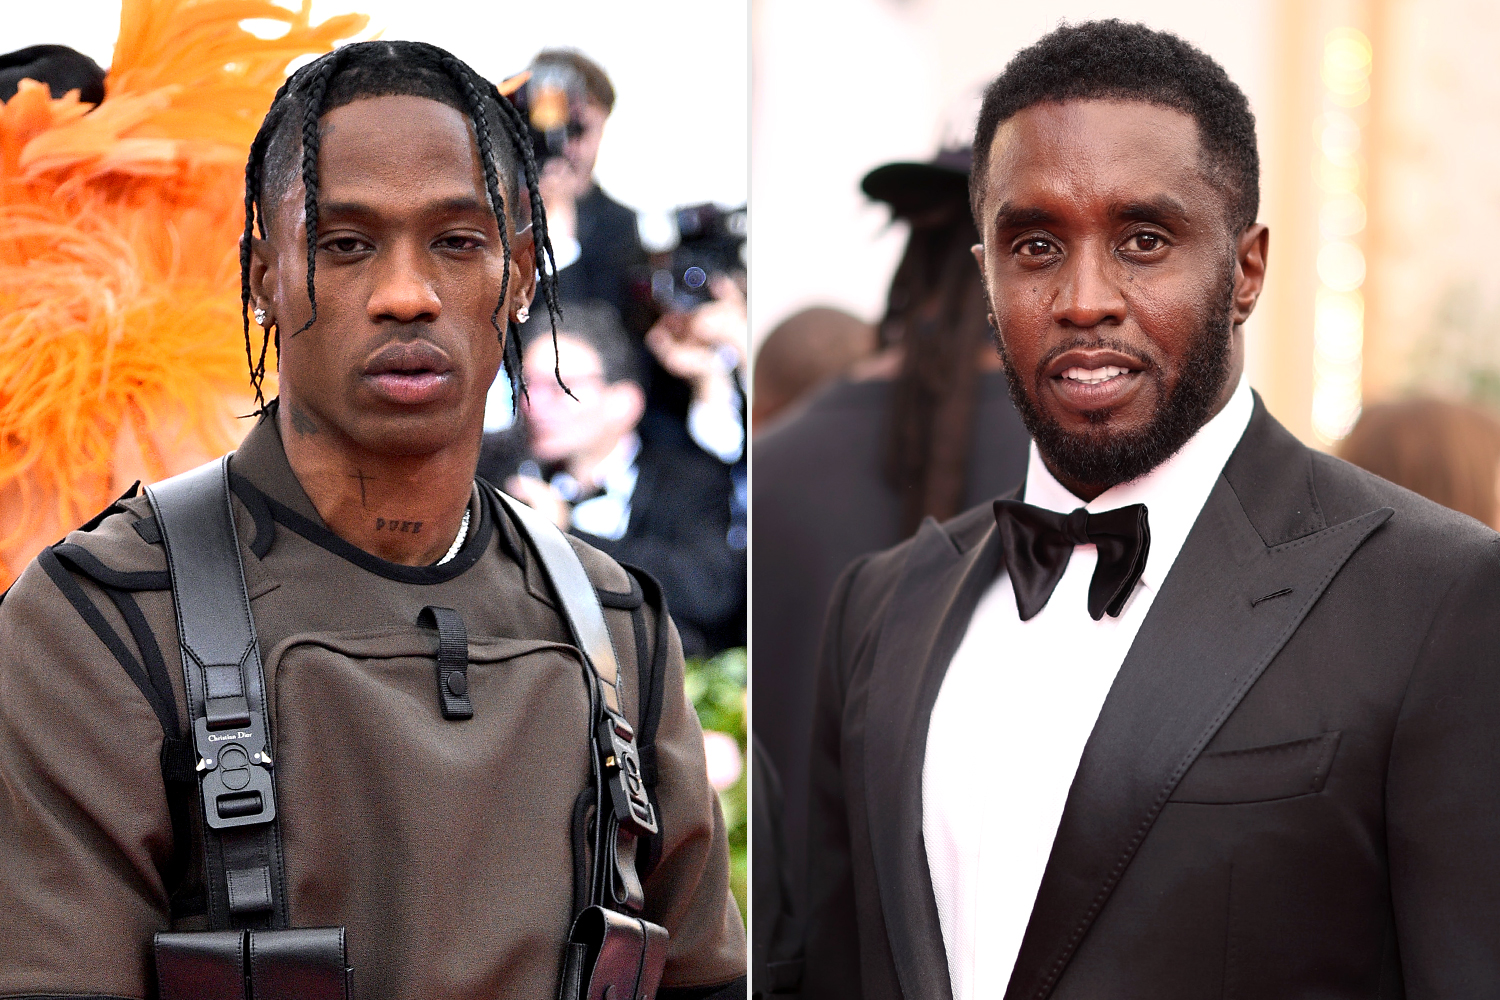 Diddy Demanded Billboard Music Awards Include Travis Scott as Performer: 'No Canceling on My Watch'